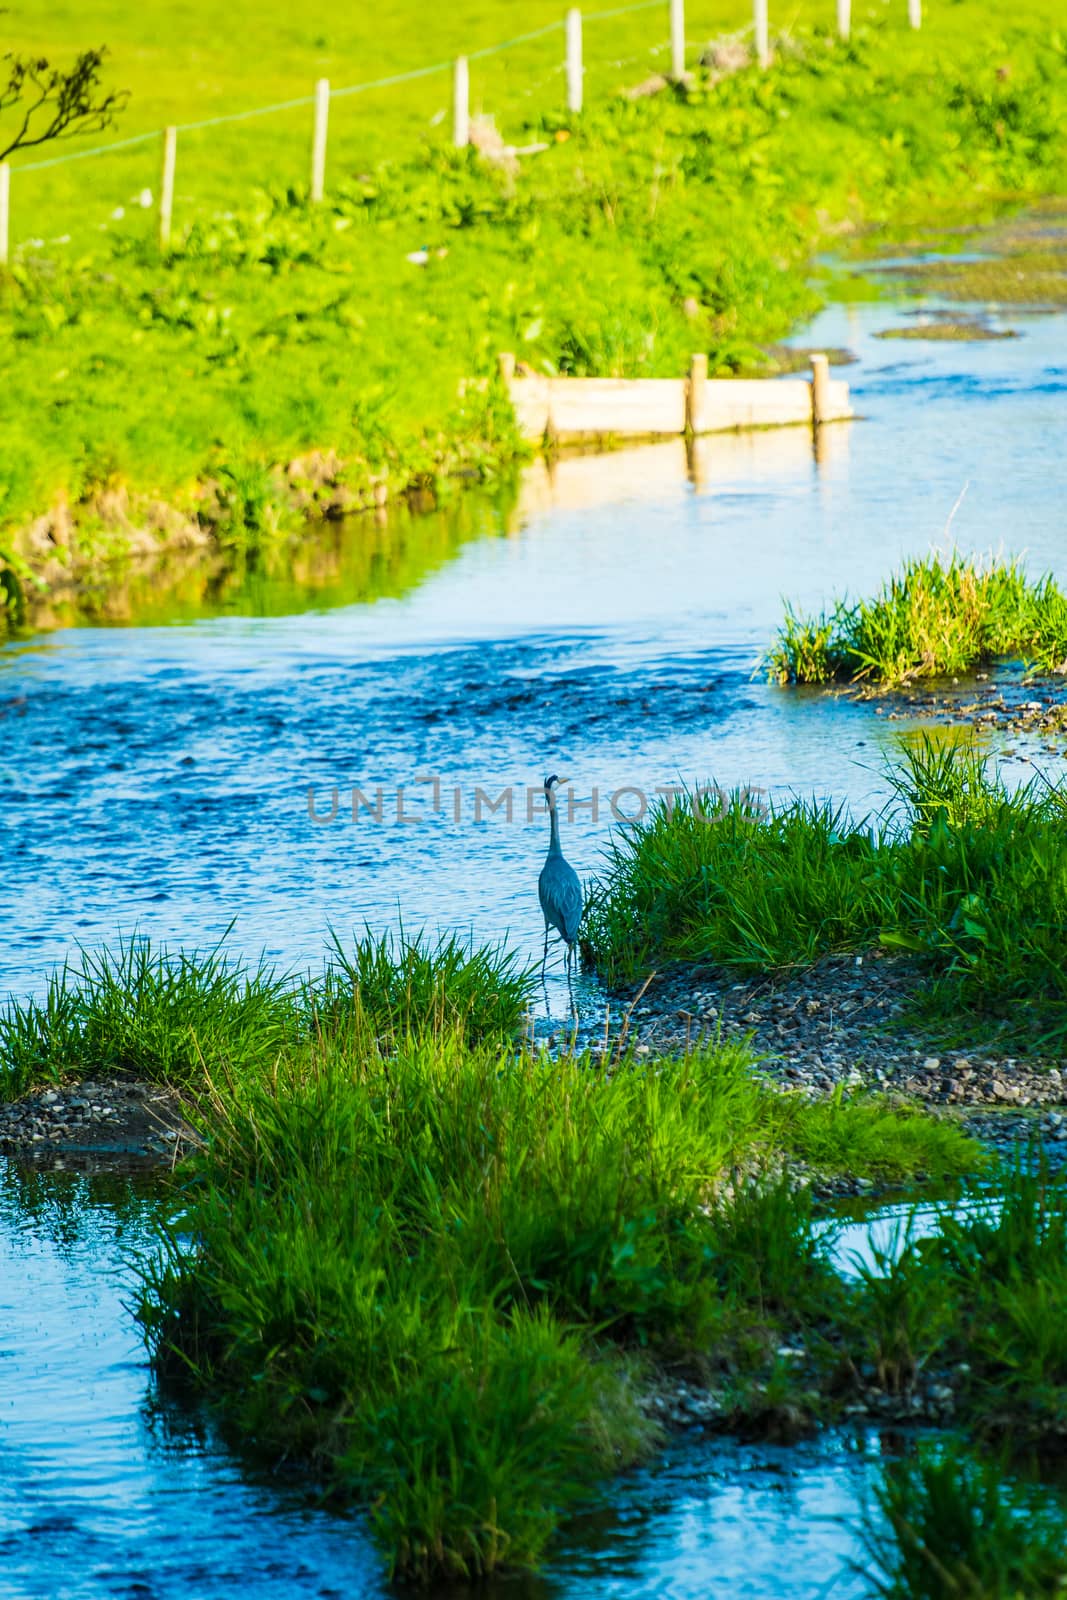 grey heron standing on a island in the river Bela looking for fish